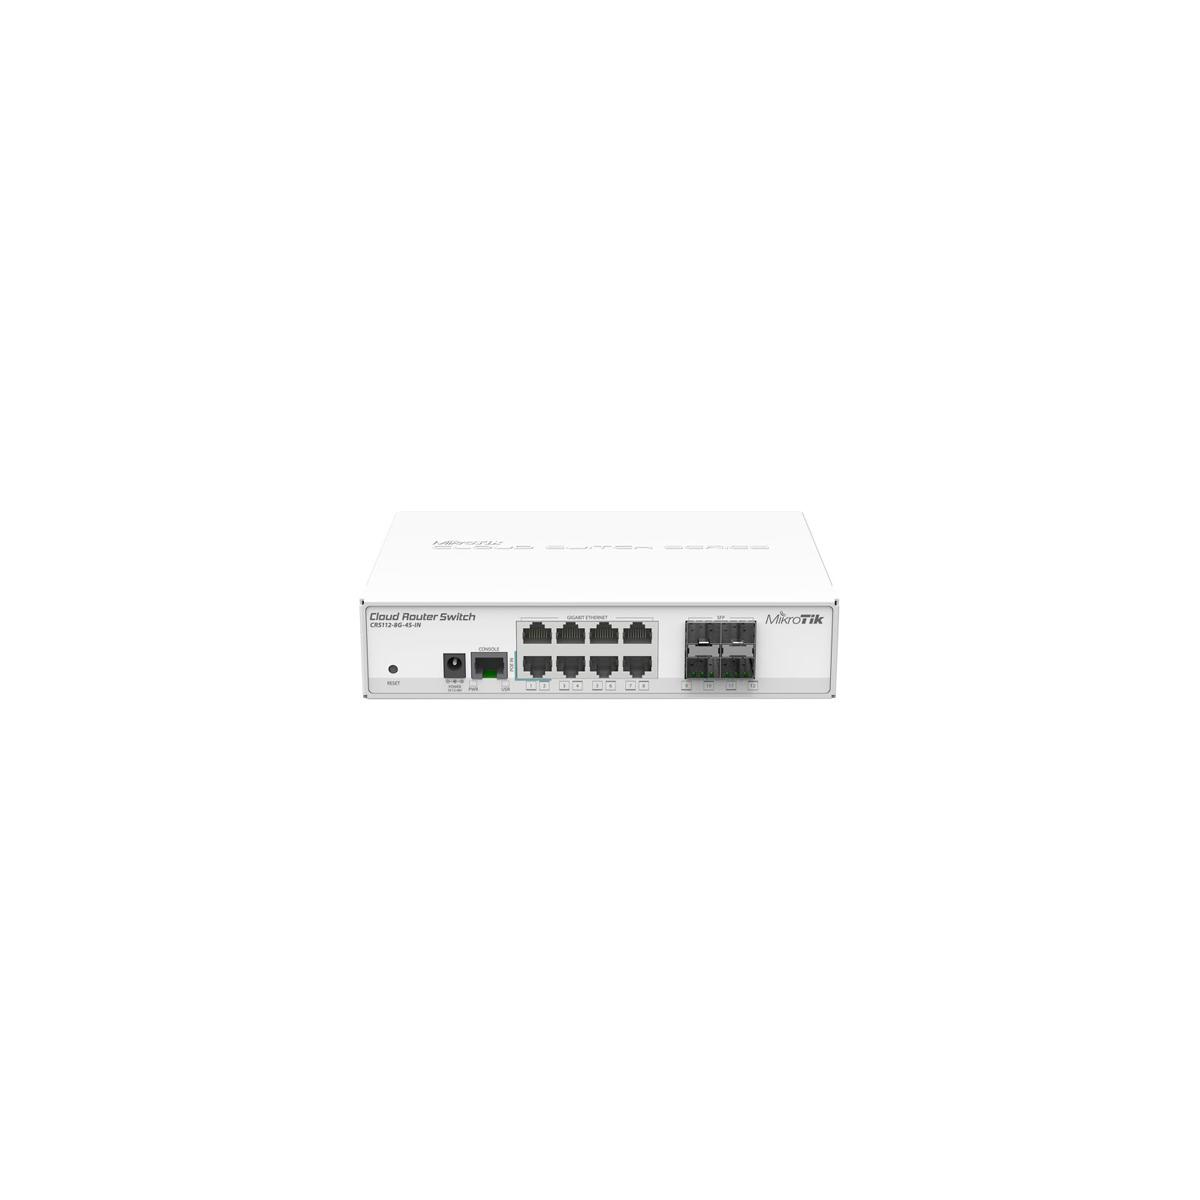 13 MIKROTIK CRS112-8G-4S-IN Switch